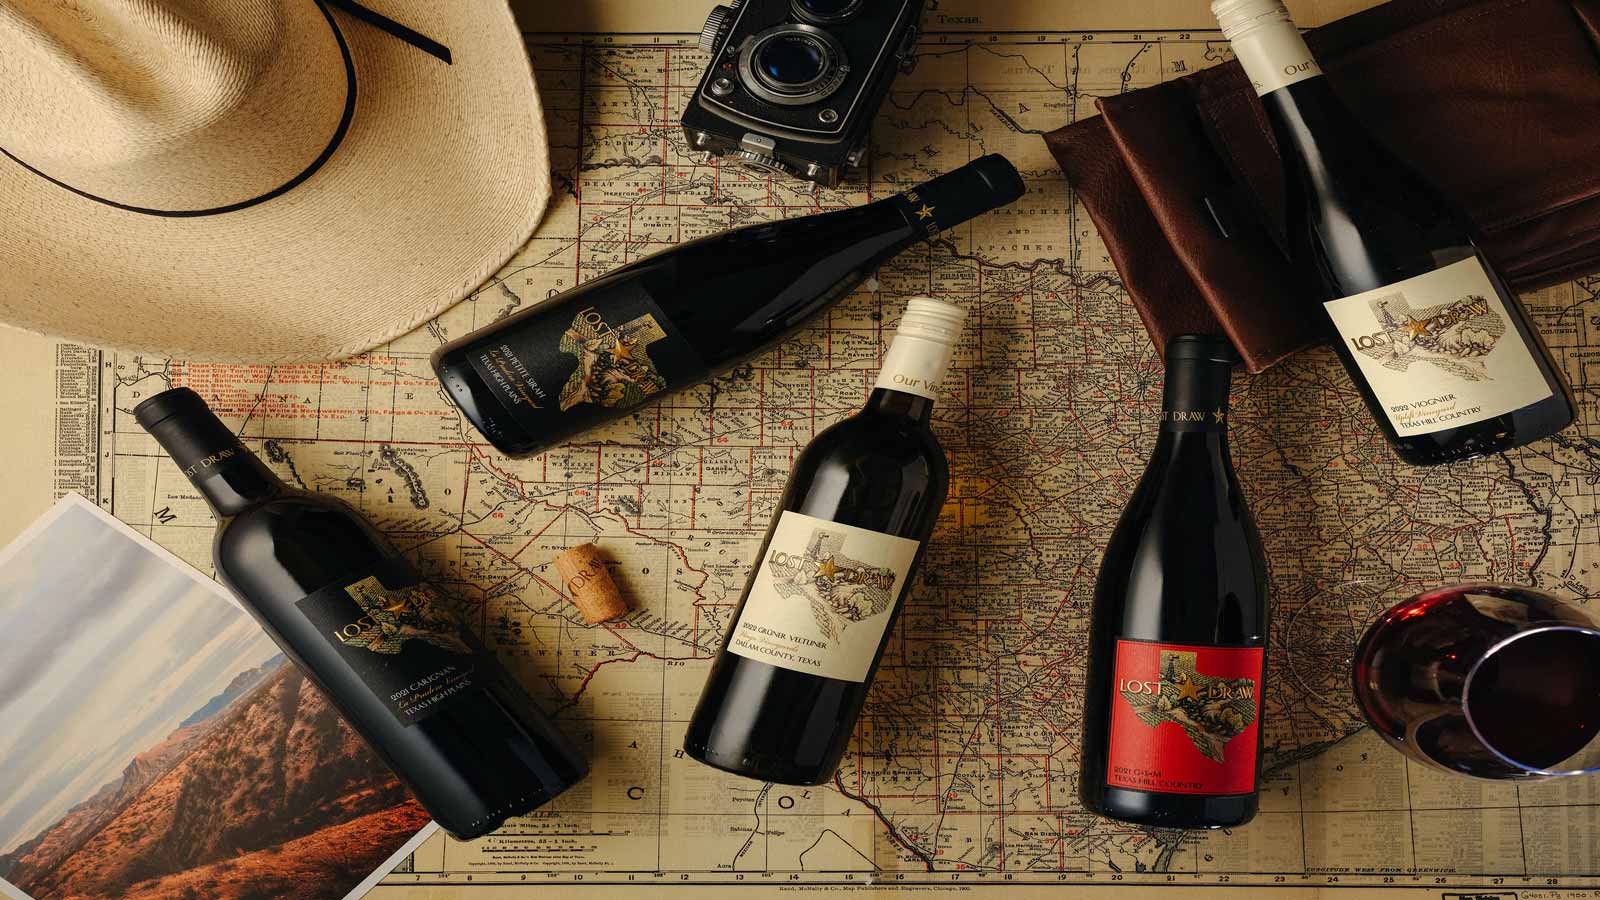 <p><em>Address: 1686 US-290, Johnson City, TX, 78636</em></p><p>From sourcing their grapes from the TX High Plains to delivering enticing tastings in their new Johnson City location, founder Andrew Sides’s passion for winemaking has only grown like the grapes on his uncle’s farm he tended in his youth.</p><p>Their first vintage was produced in 2012, and doors opened in 2014, making <a href="https://lostdraw.com/about" rel="nofollow noopener">Lost Draw</a> one of the newer Hill Country wineries. I recommend their 2019 Albarino with its notes of orange blossoms, Meyer lemons, and lilies while food pairing it with a rich Manchego cheese and dried sausage. Take a bottle home to enjoy a glass of wine with family and friends.</p><p><strong>More Articles From The Happiness Function:</strong></p><ul> <li><a href="https://thehappinessfxn.com/best-distilleries-central-texas/">11 Best Distilleries Central Texas Has To Offer, According To a Local</a></li> <li><a href="https://thehappinessfxn.com/best-tacos-in-austin-and-san-antonio/">Taco Rivalry: 12 Best Taco Spots in Austin and San Antonio, Texas</a></li> </ul>